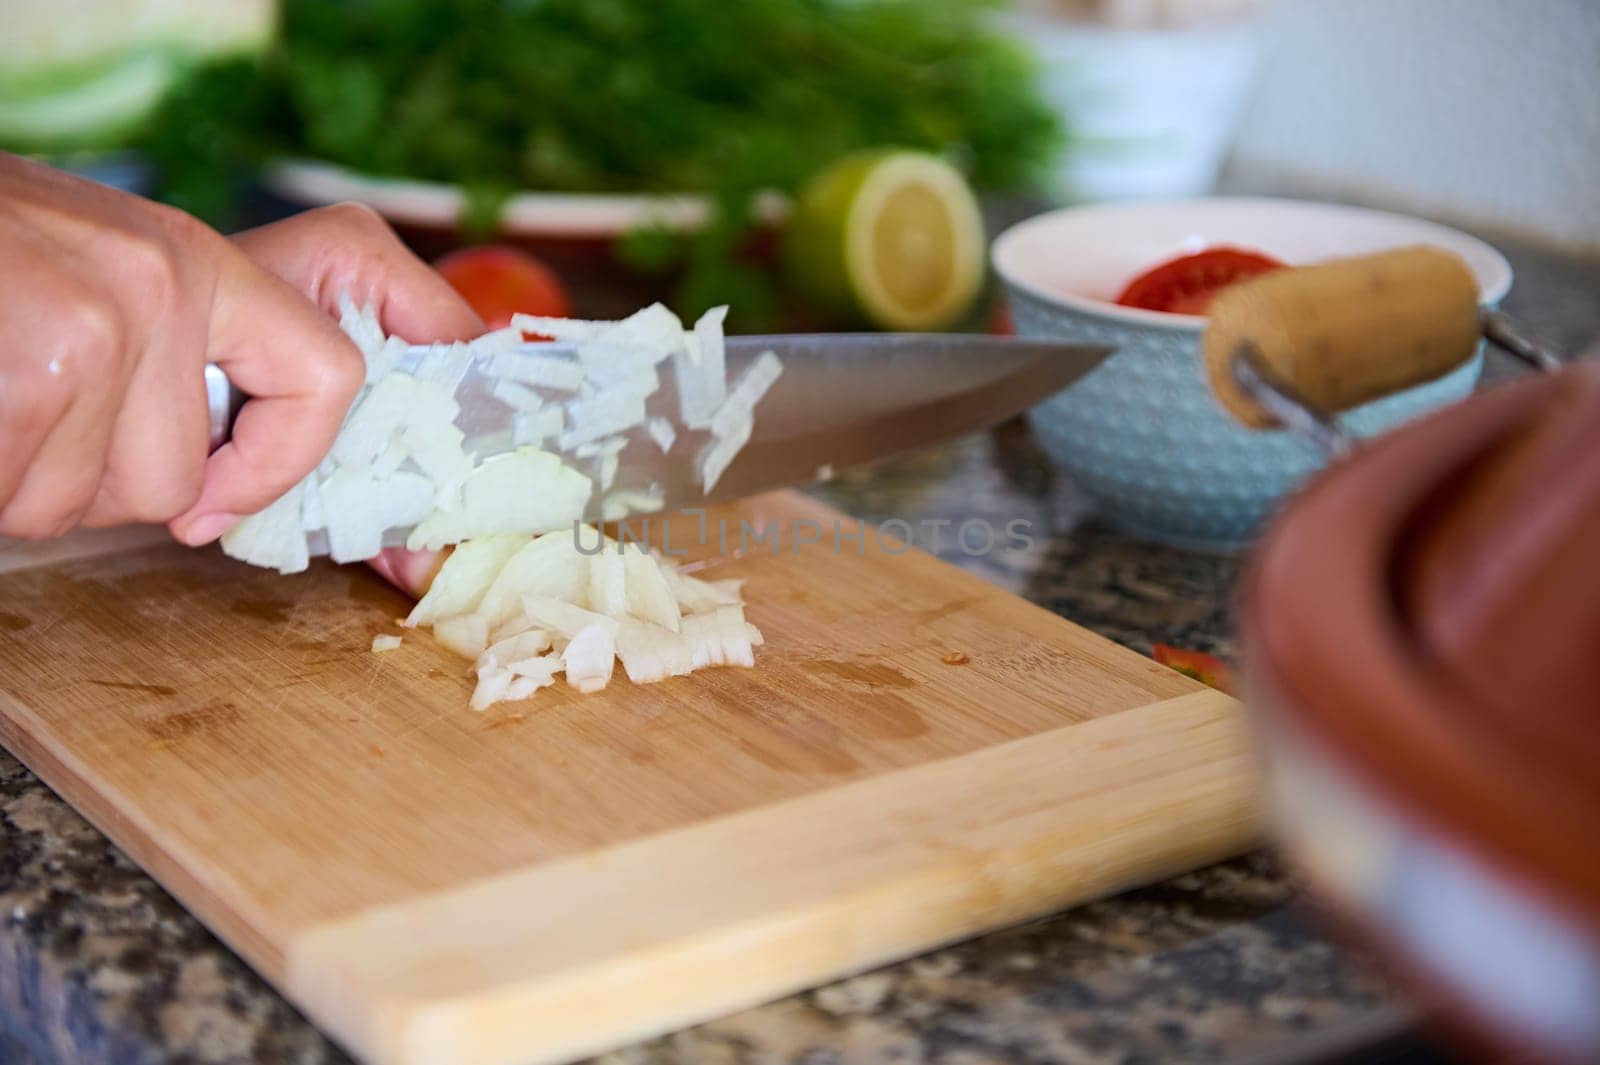 Close-up chef's hands chopping onion on wooden cutting board, preparing dinner at home. Healthy eating concept. Food background. Culinary